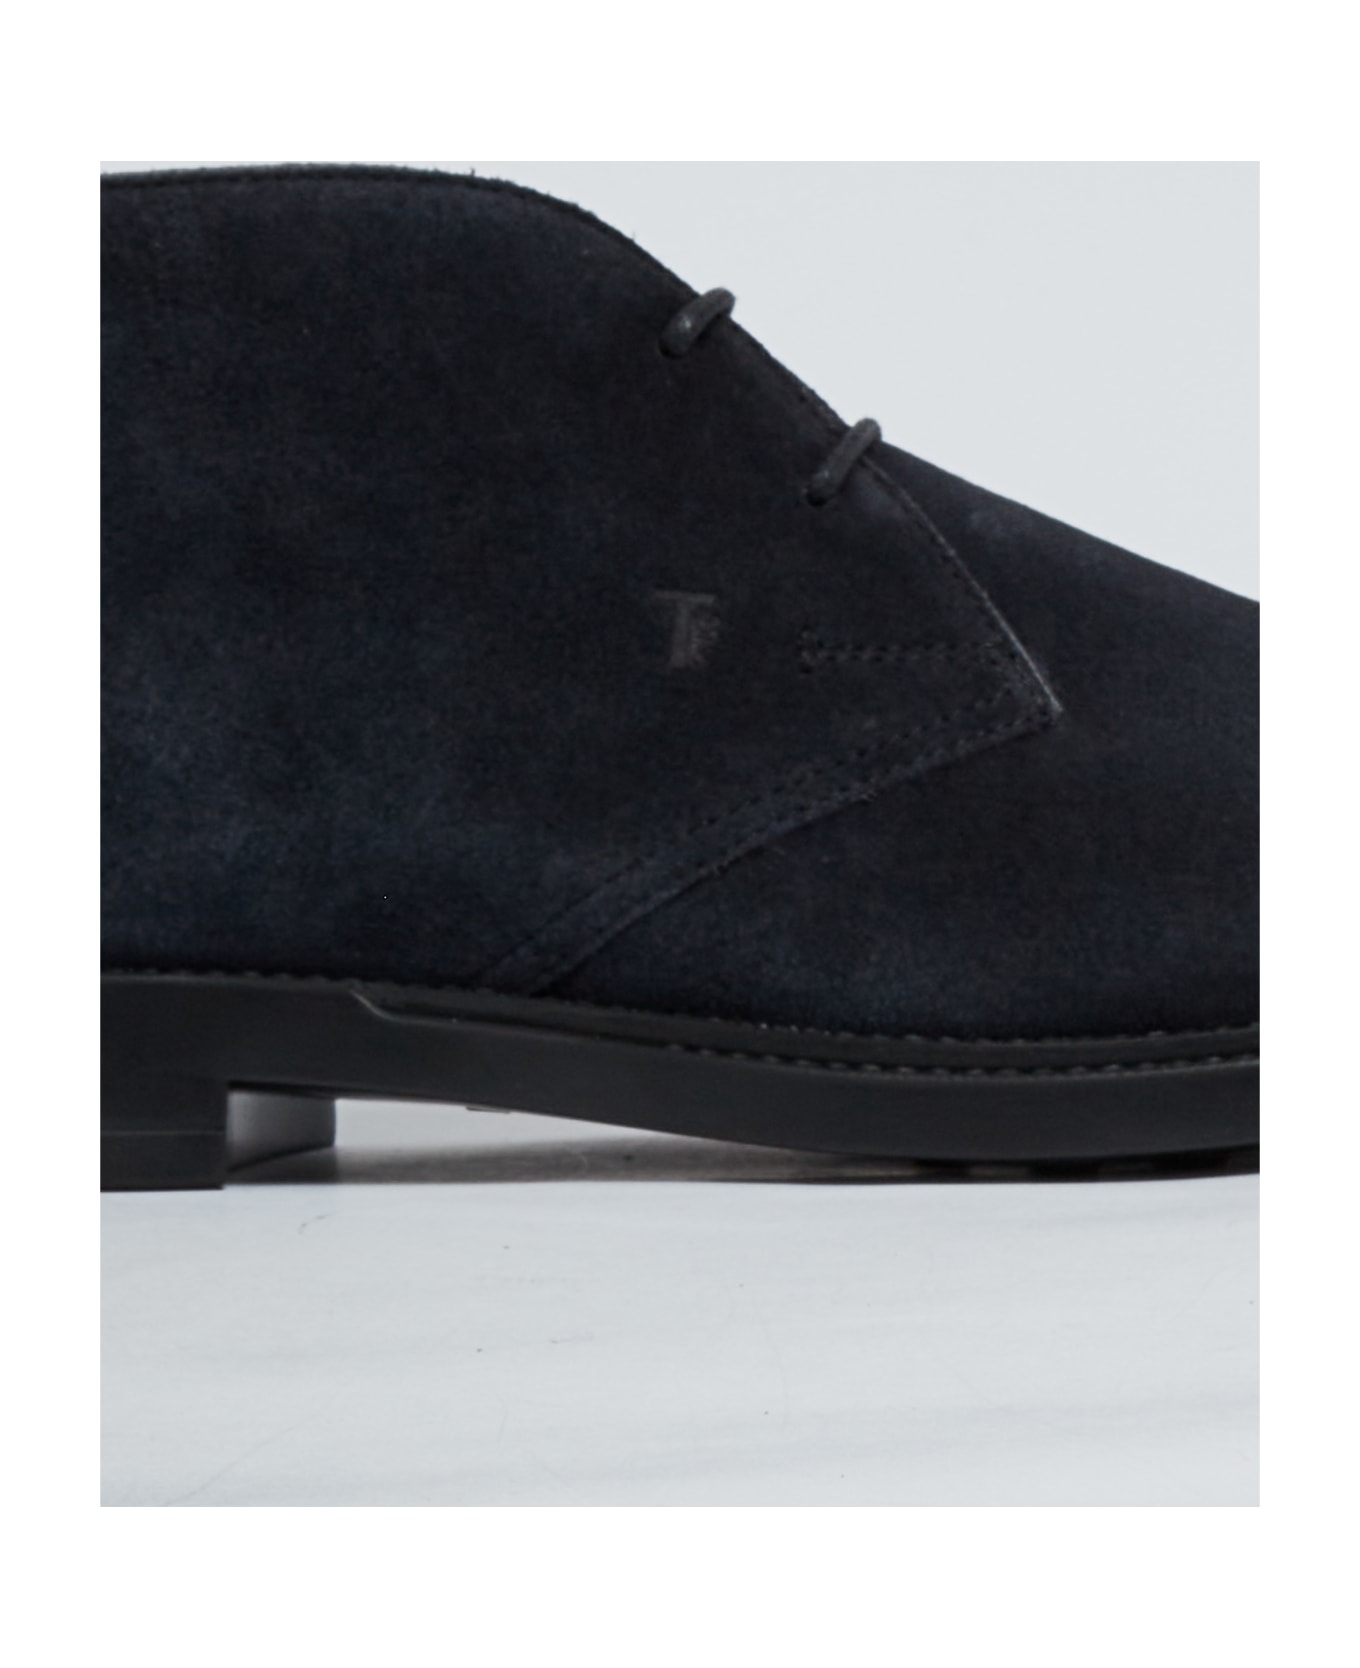 Tod's Polacco Formale 62c Laced Shoe - BLU NOTTE ブーツ